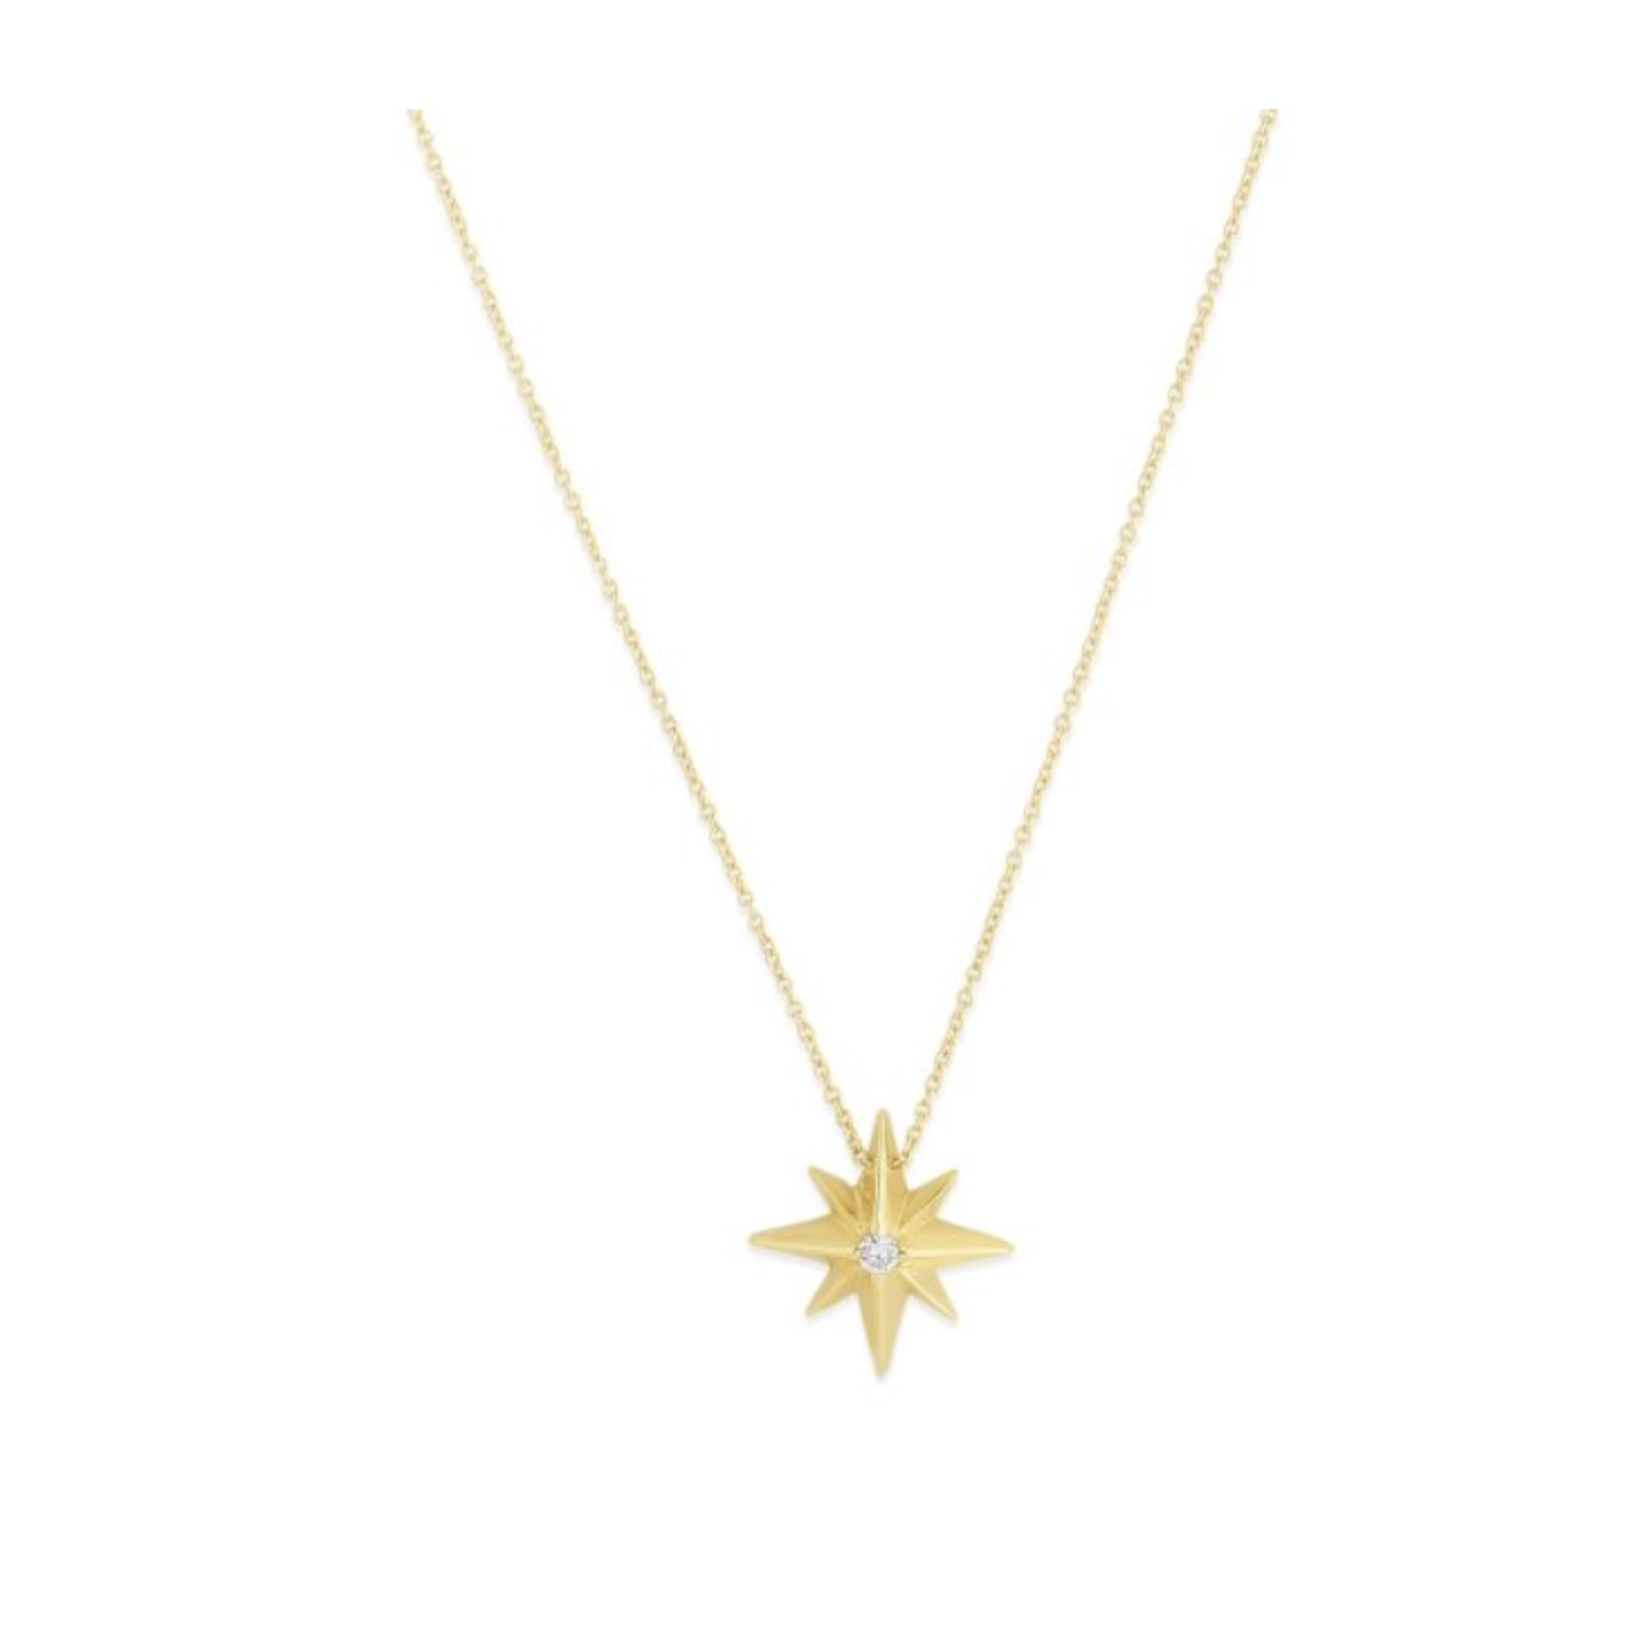 Royal Chain 14K Gold Diamond North Star Necklace